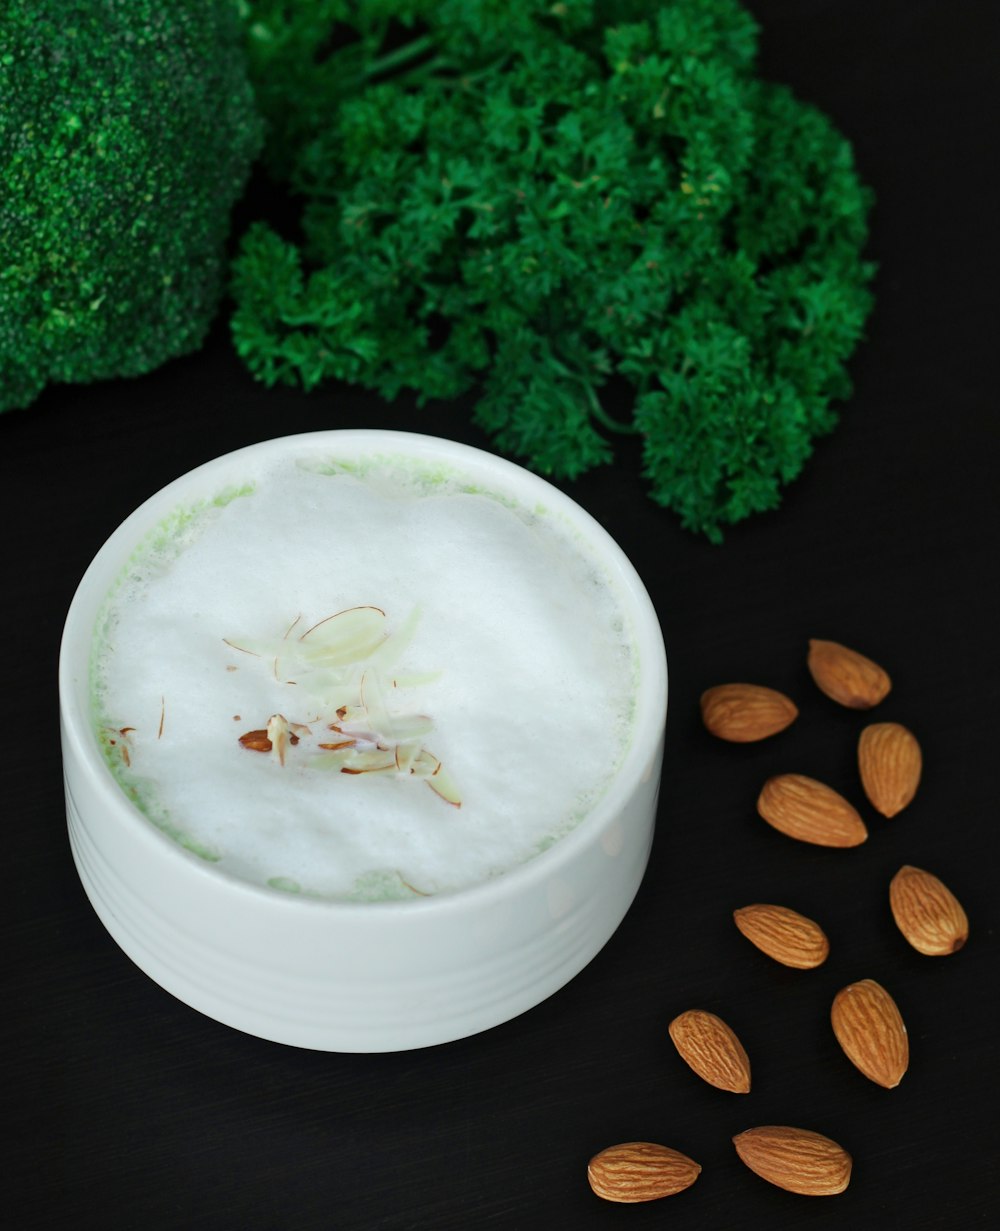 a white container filled with almonds next to broccoli